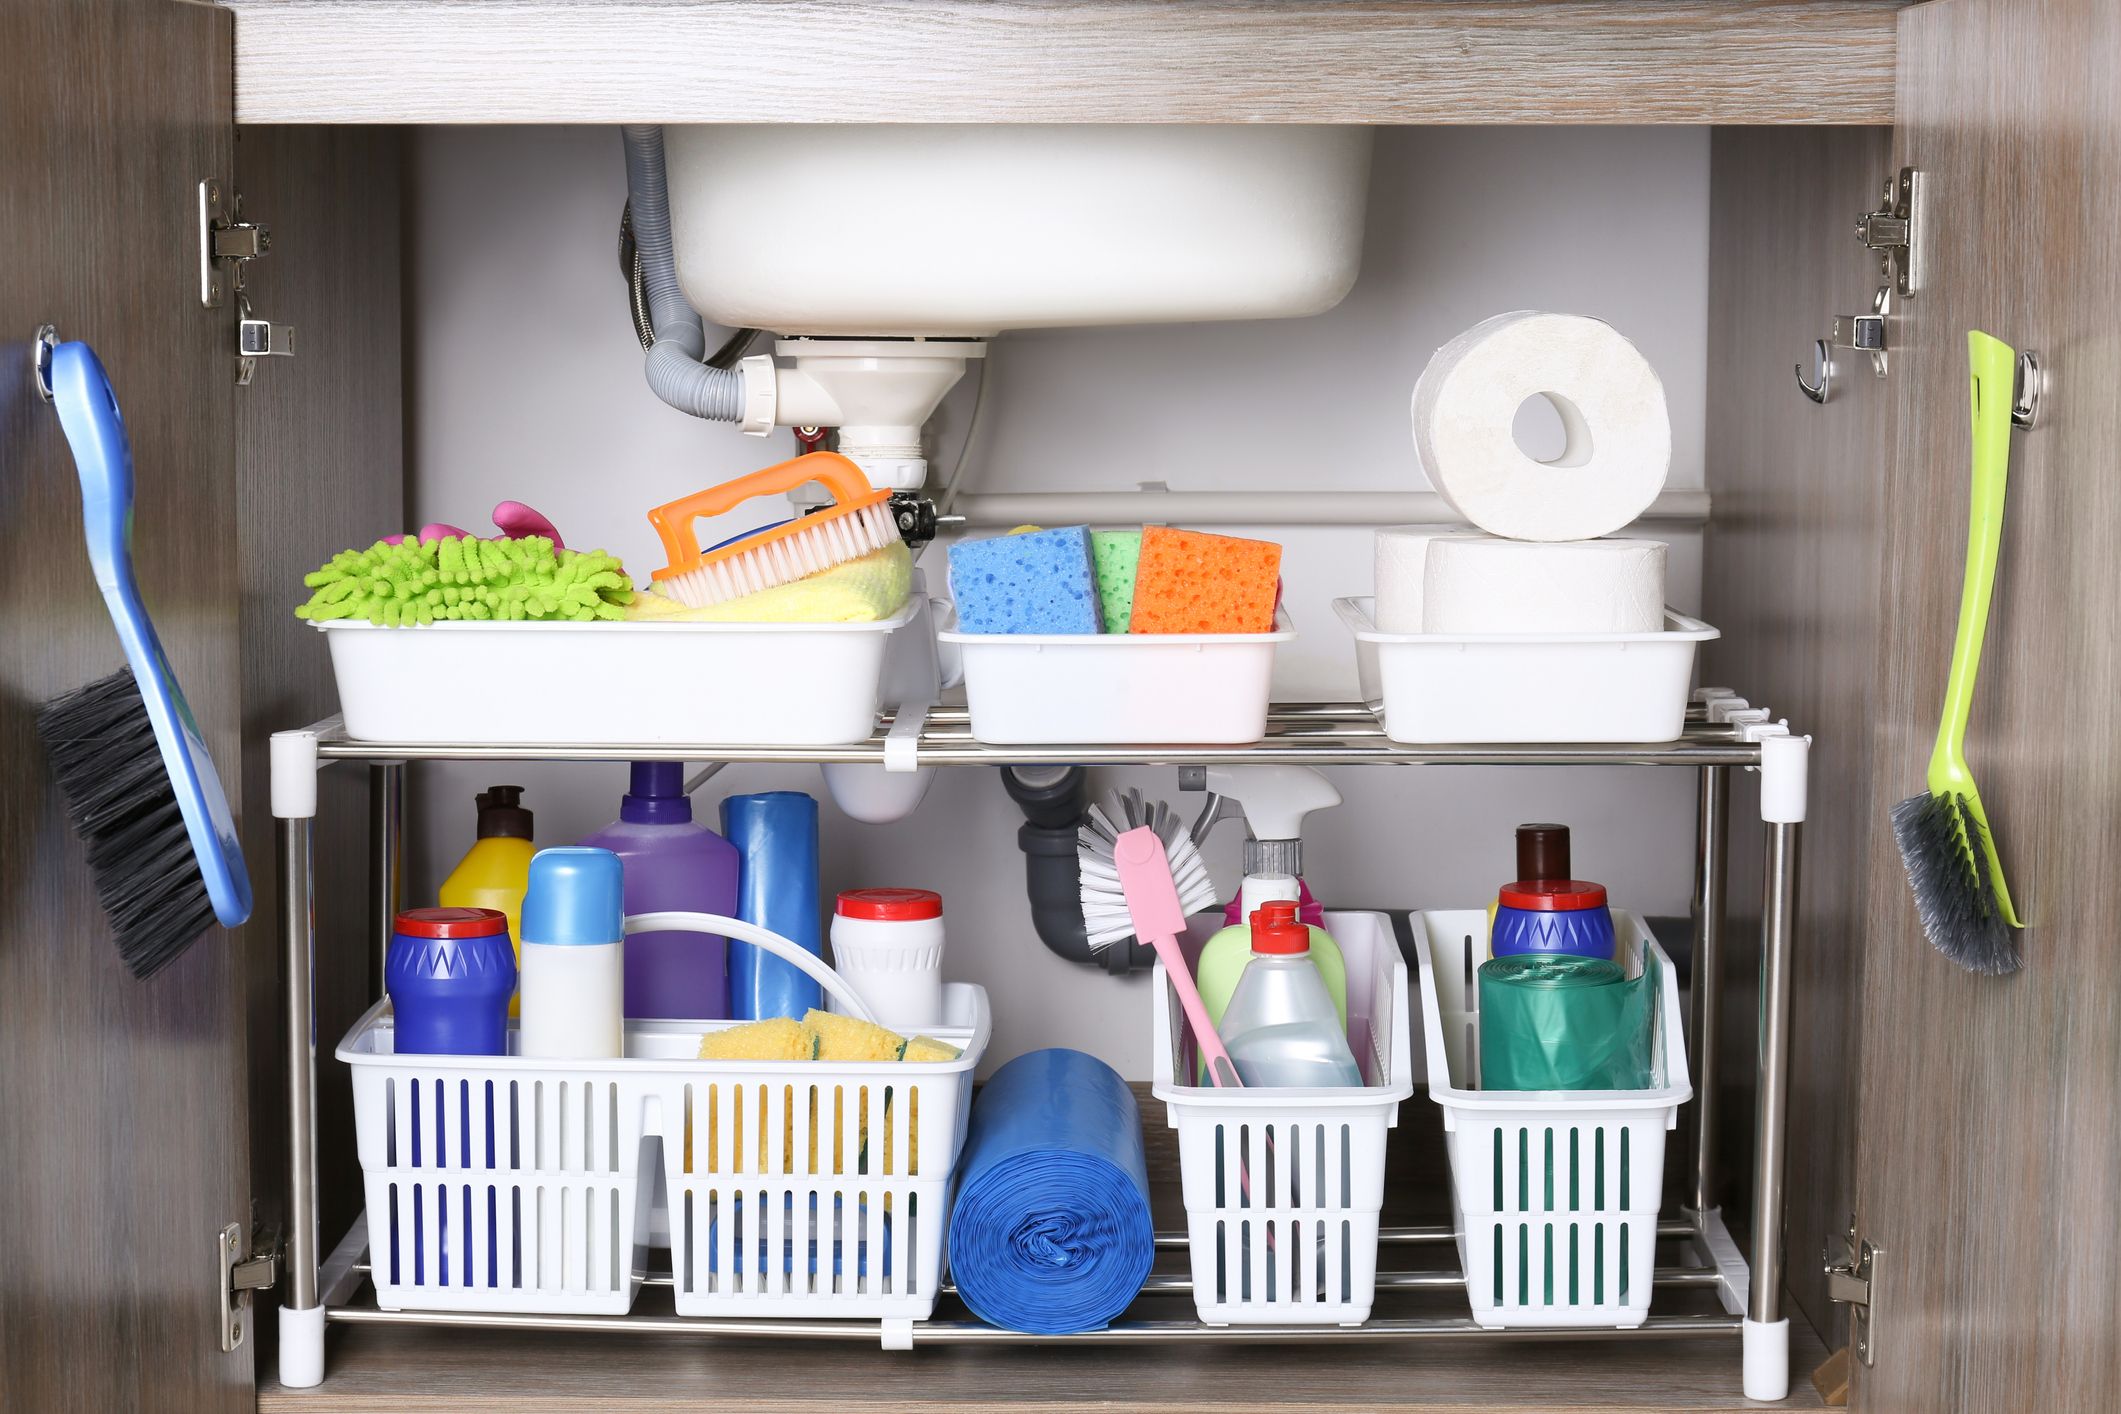 https://hips.hearstapps.com/hmg-prod/images/how-to-organize-kitchen-cabinets-bins-cleaning-supplies-6584a11dedd33.jpg